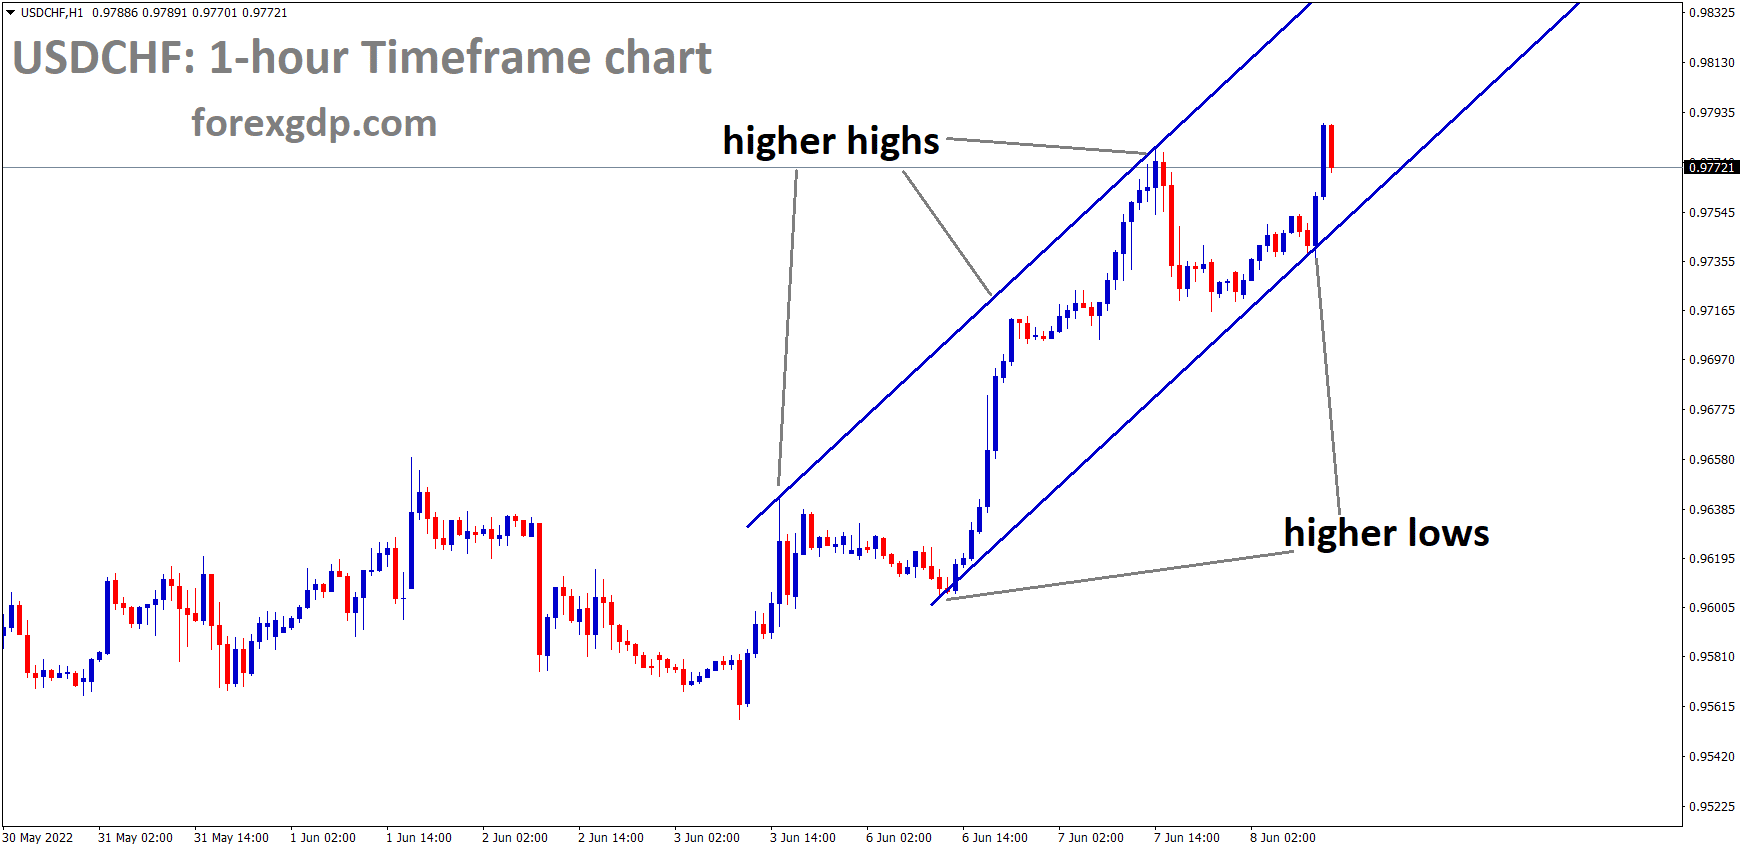 USDCHF is moving in an Ascending channel and the Market has rebounded from the higher low area of the channel